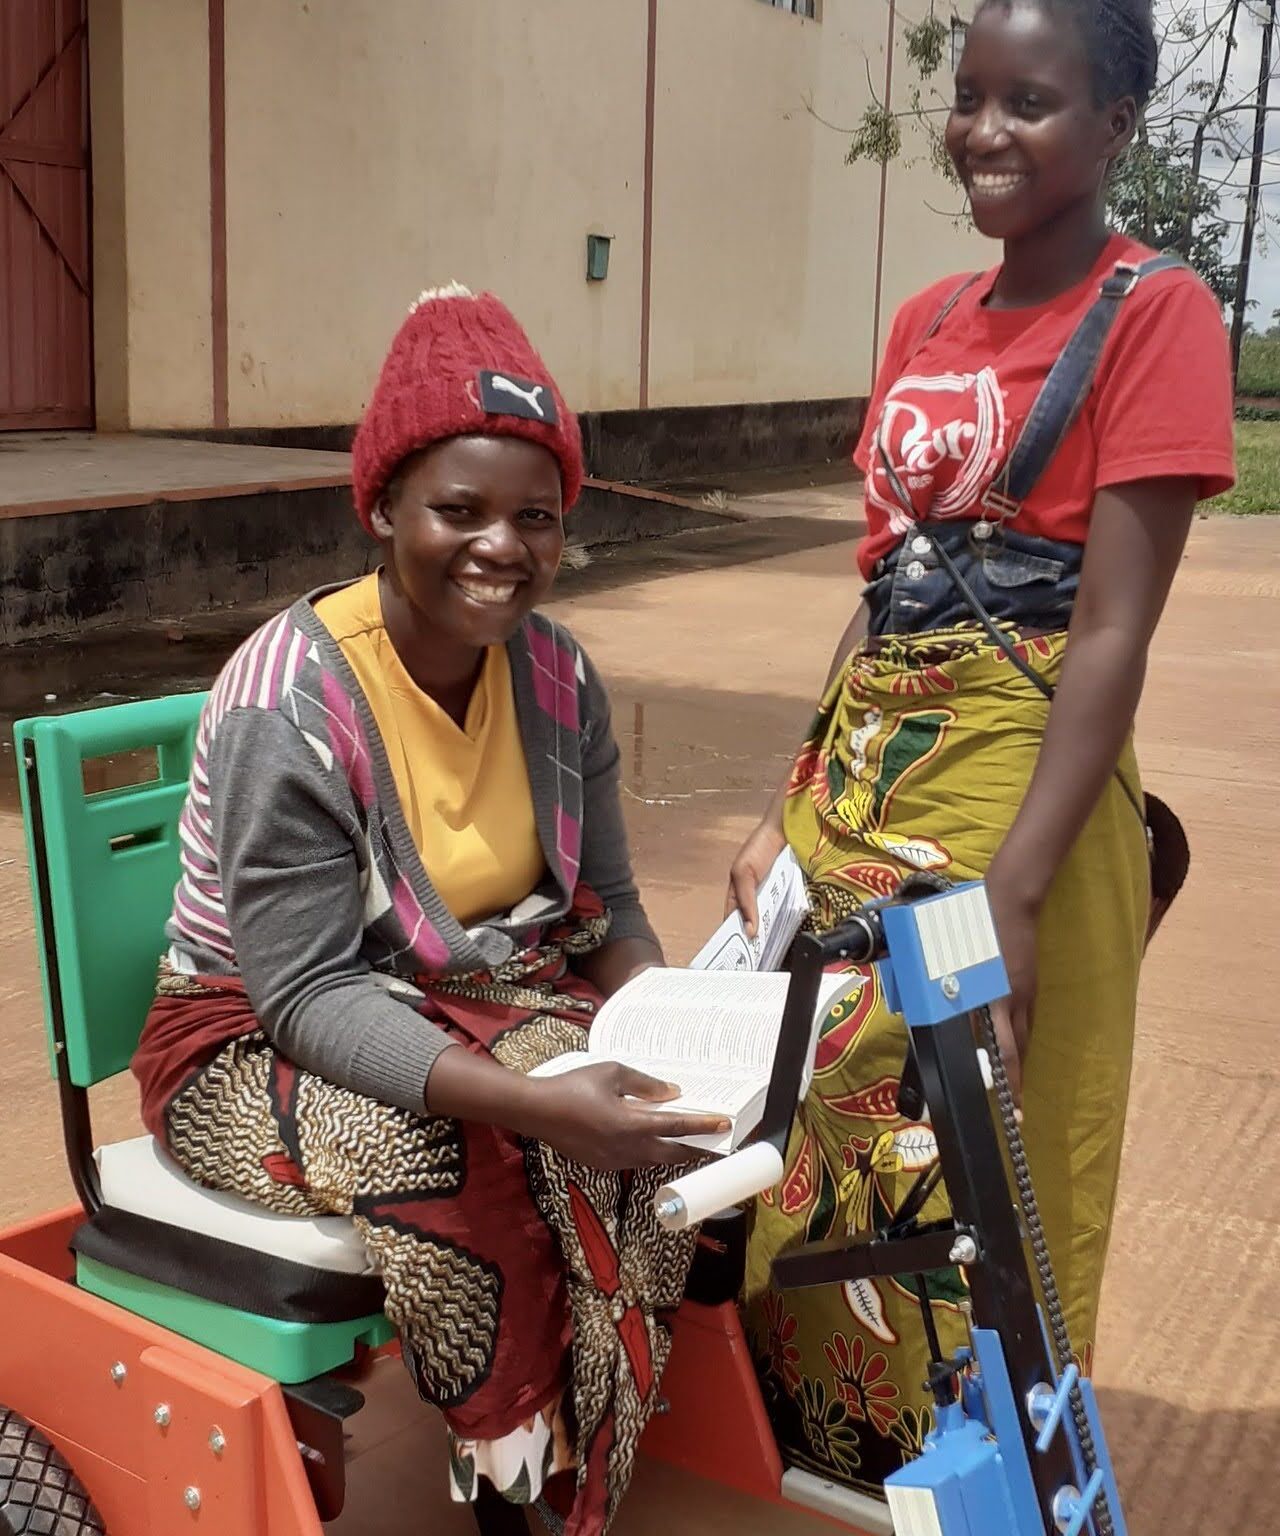 Two women together one seated in a mobility cart and the other standing next to her both smiling